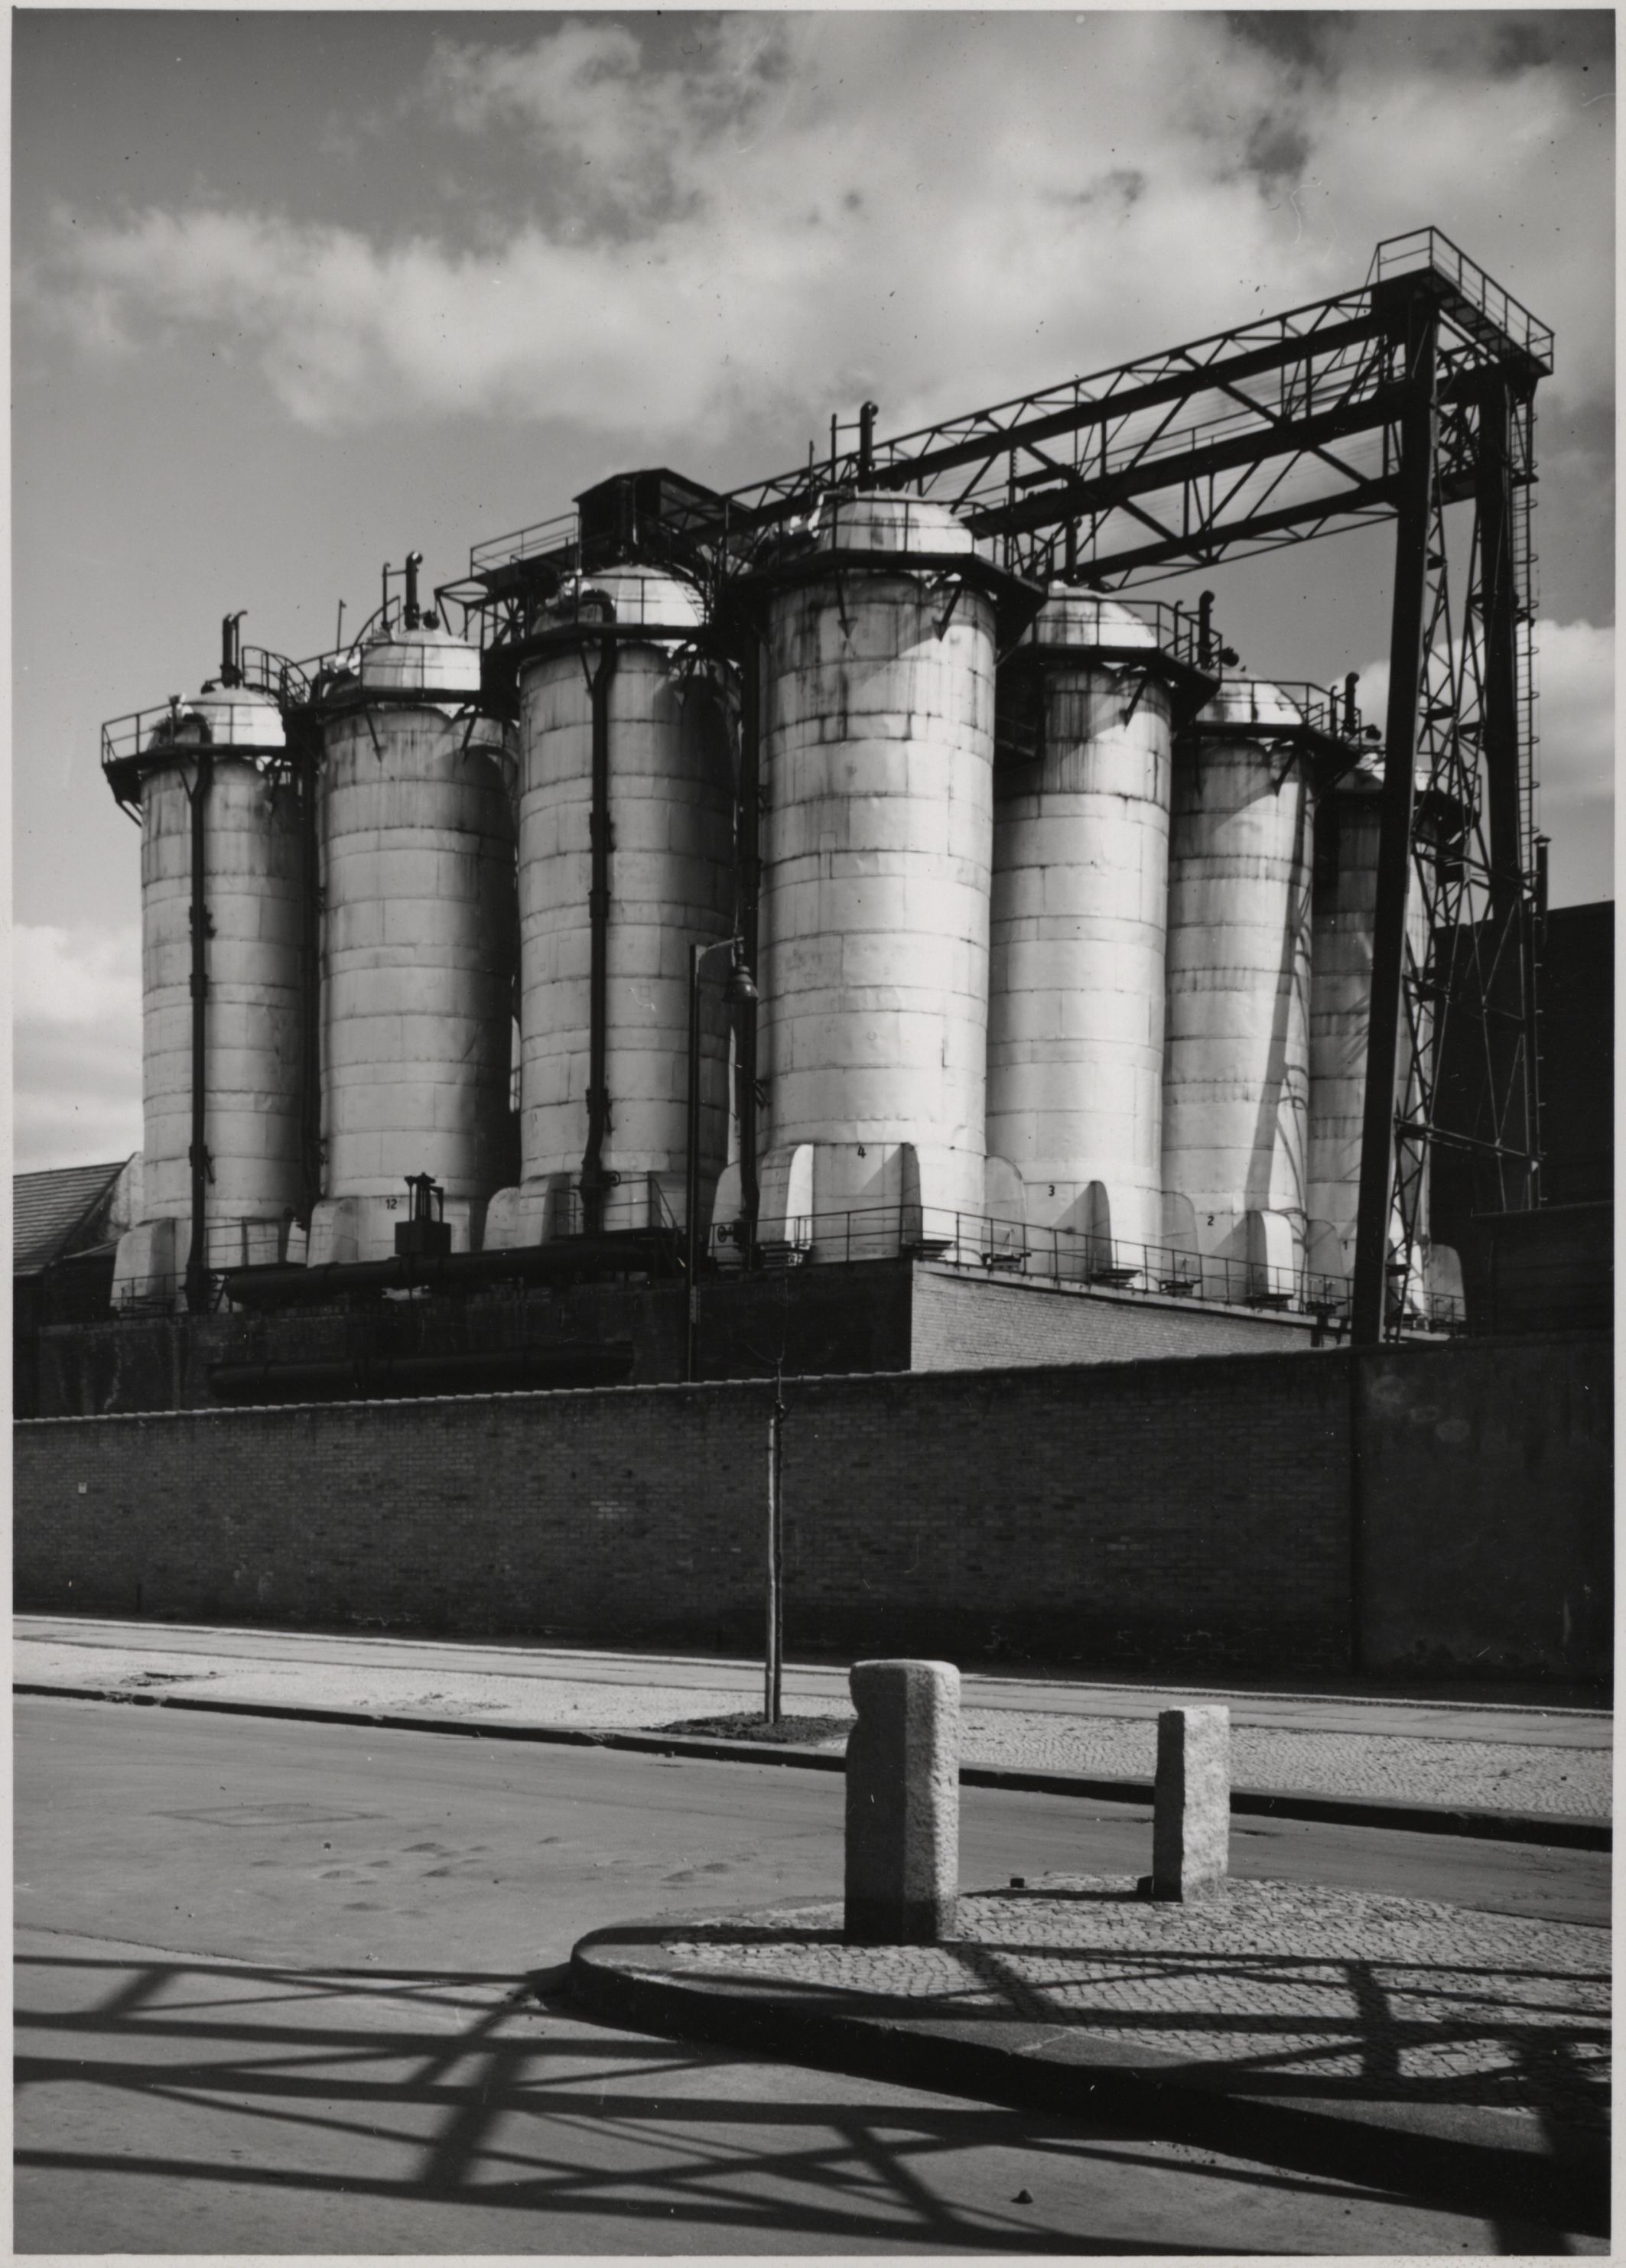 Figure 2. The Ruths steam storage facility, built in 1929 (pictured in 1952 and 2018). Sources: Landesarchiv Berlin (LAB) F Rep. 290 (07), no. 0019330, photo by Willi Nitschke, 8 April 1952. Photo by Timothy Moss, 2018.